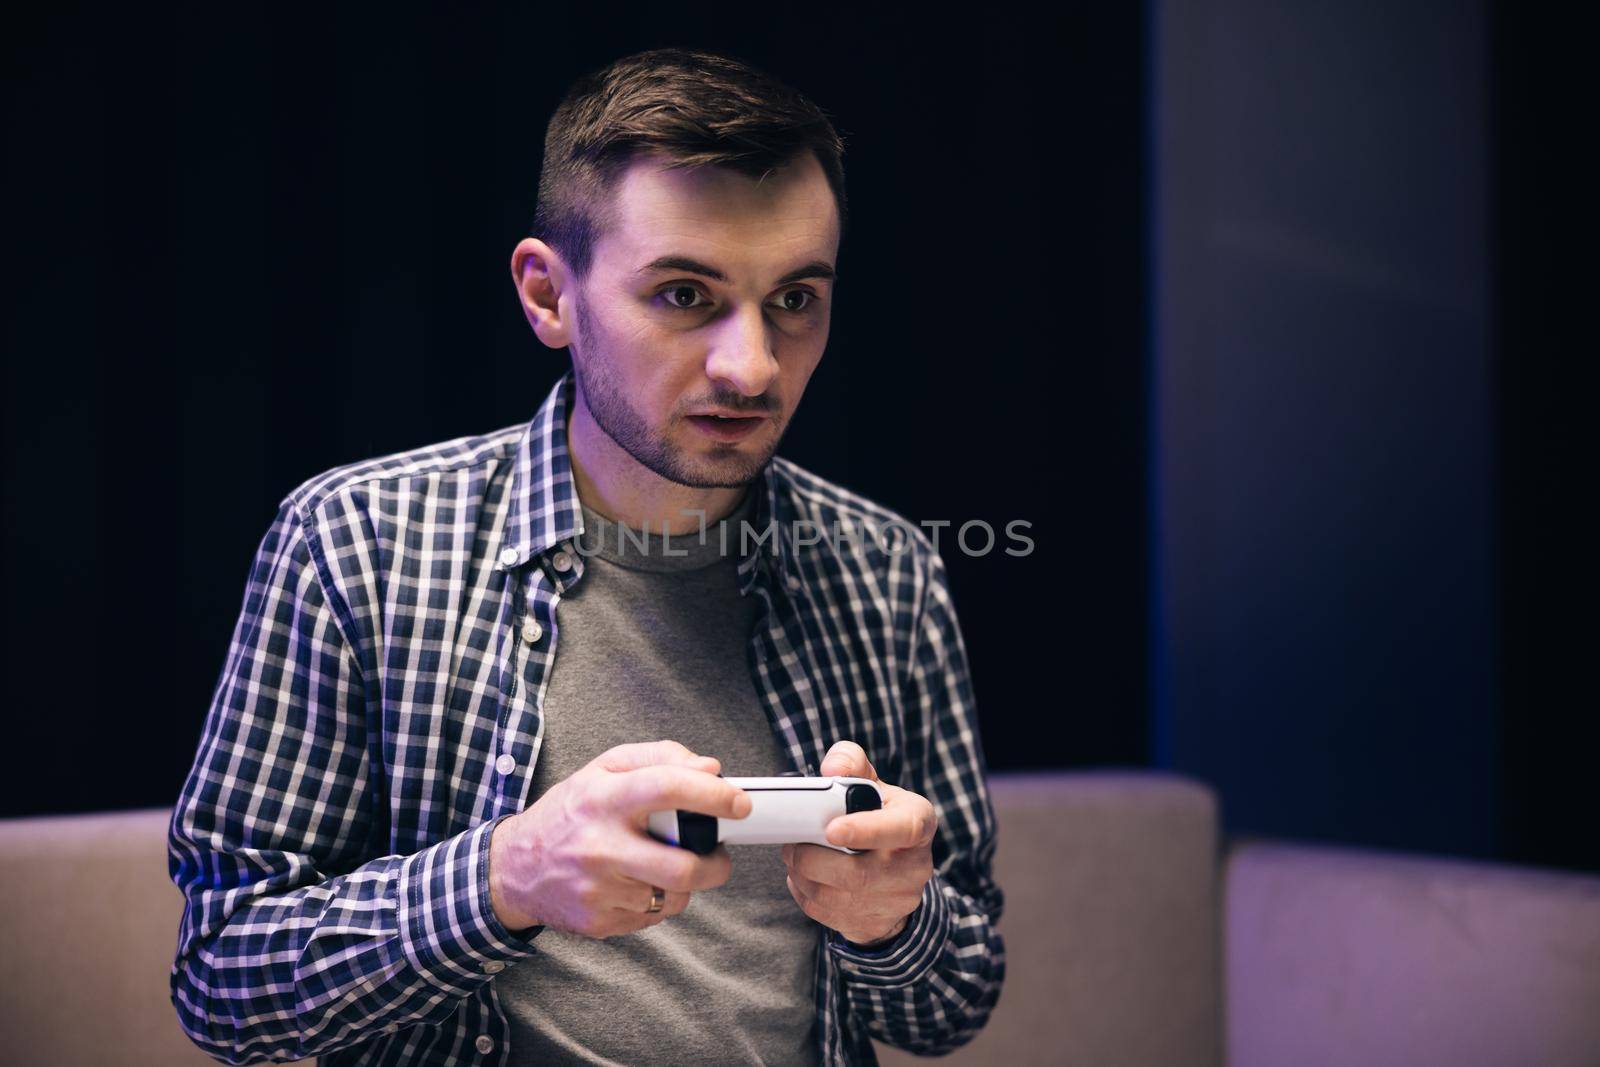 Caucasian guy playing video game and using joystick . Handsome young man enjoying free time alone while sitting on couch in living room by uflypro